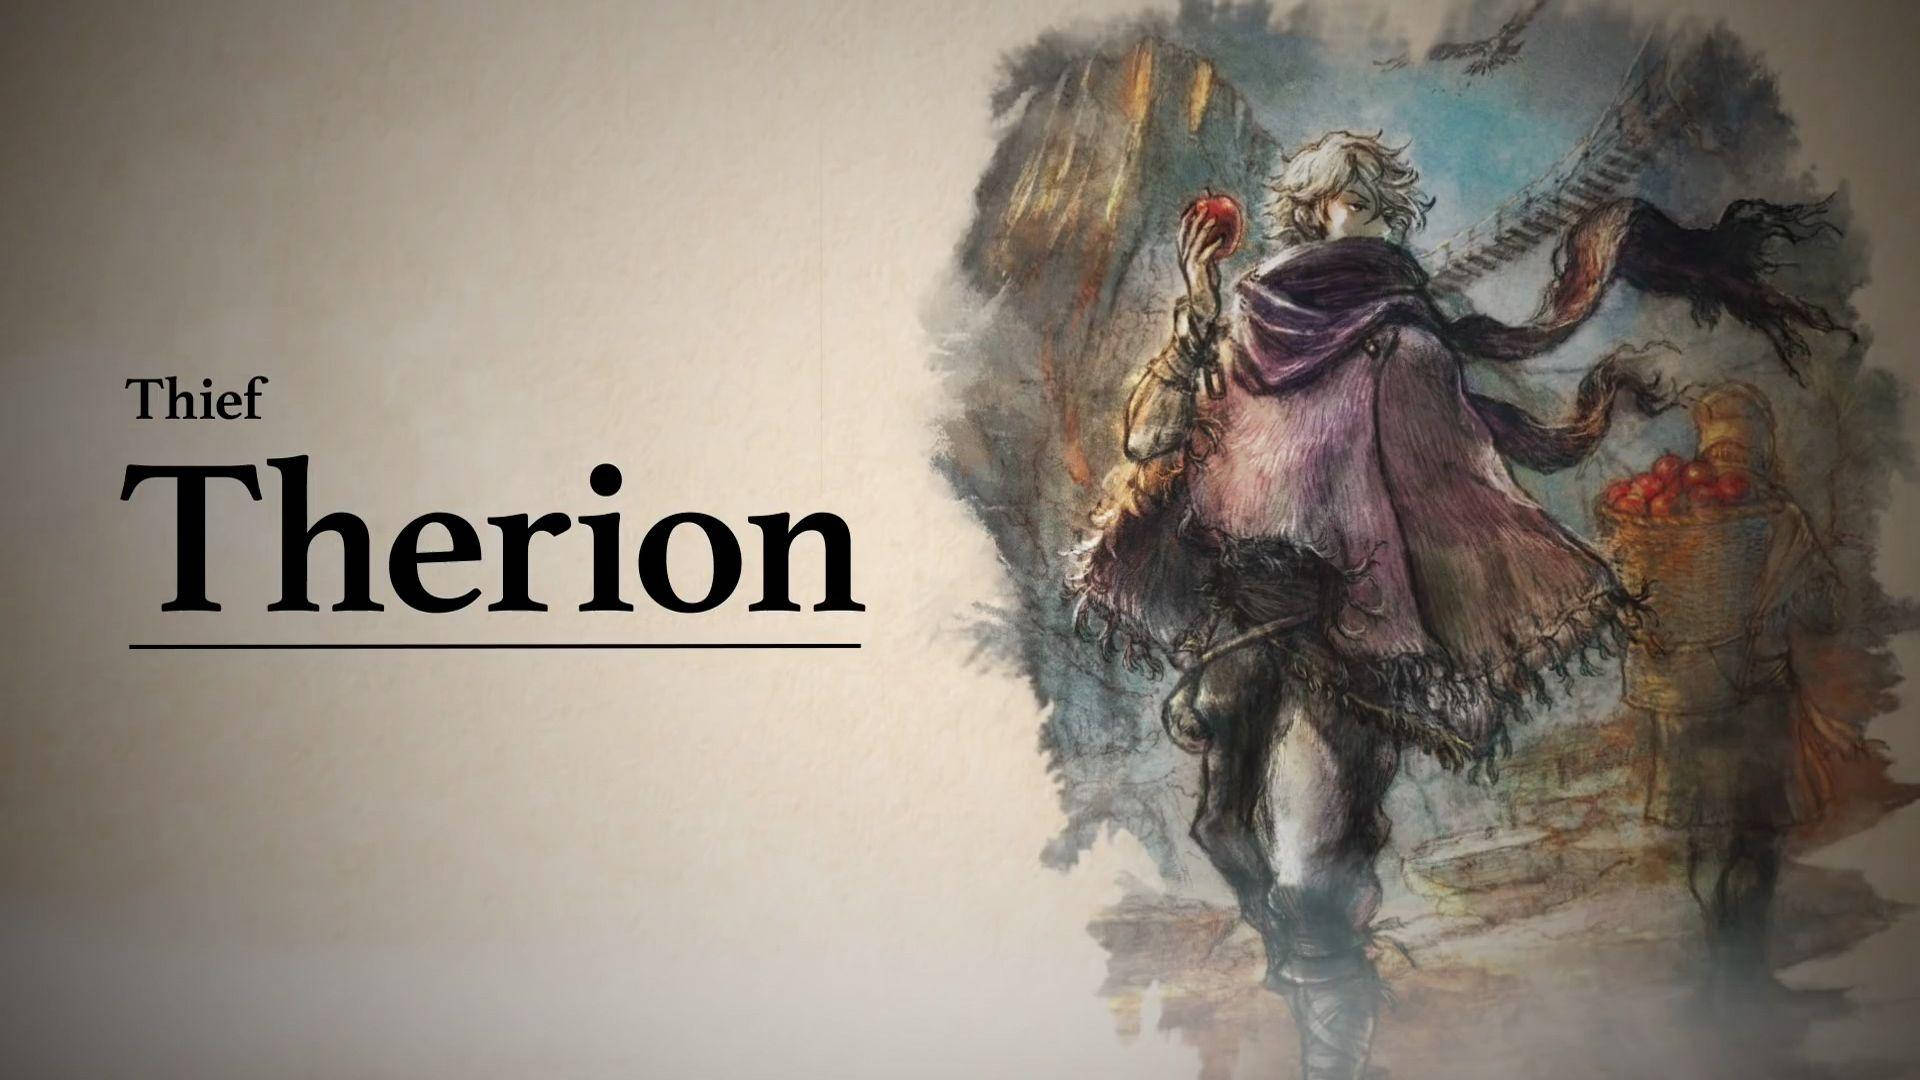 Octopath Traveler Thief Therion Background